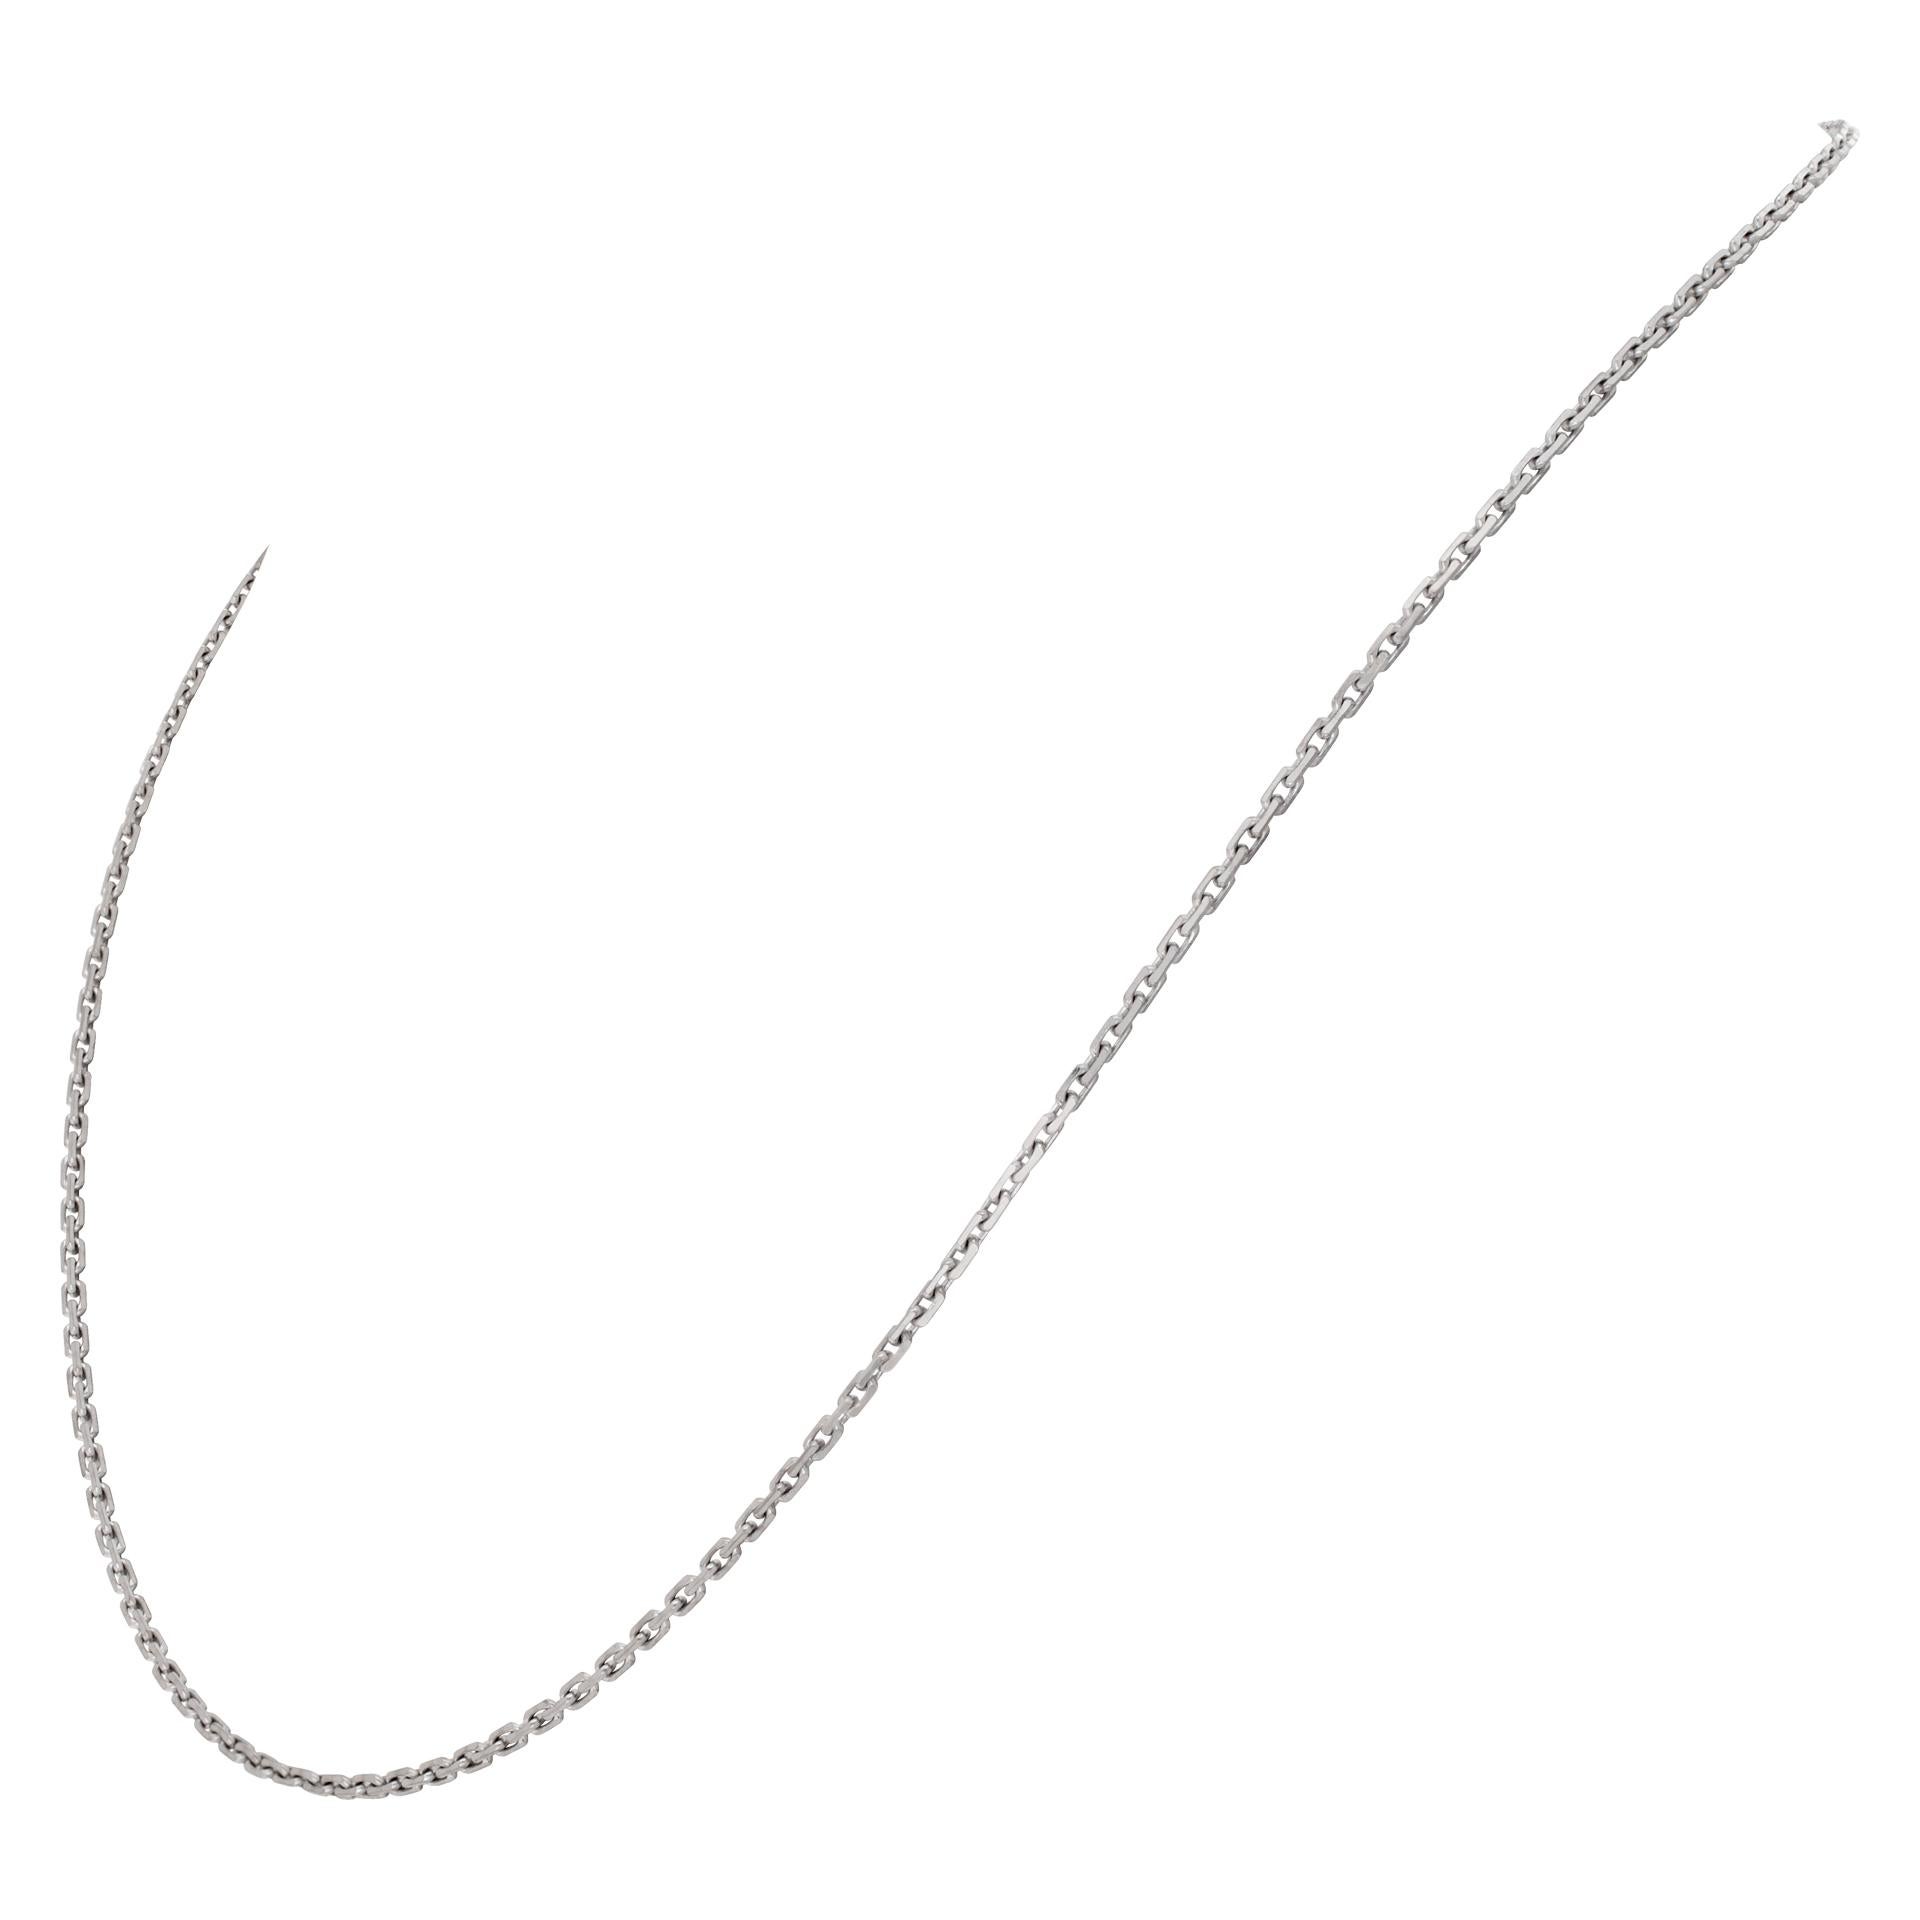 White gold thin link chain In Excellent Condition For Sale In Surfside, FL